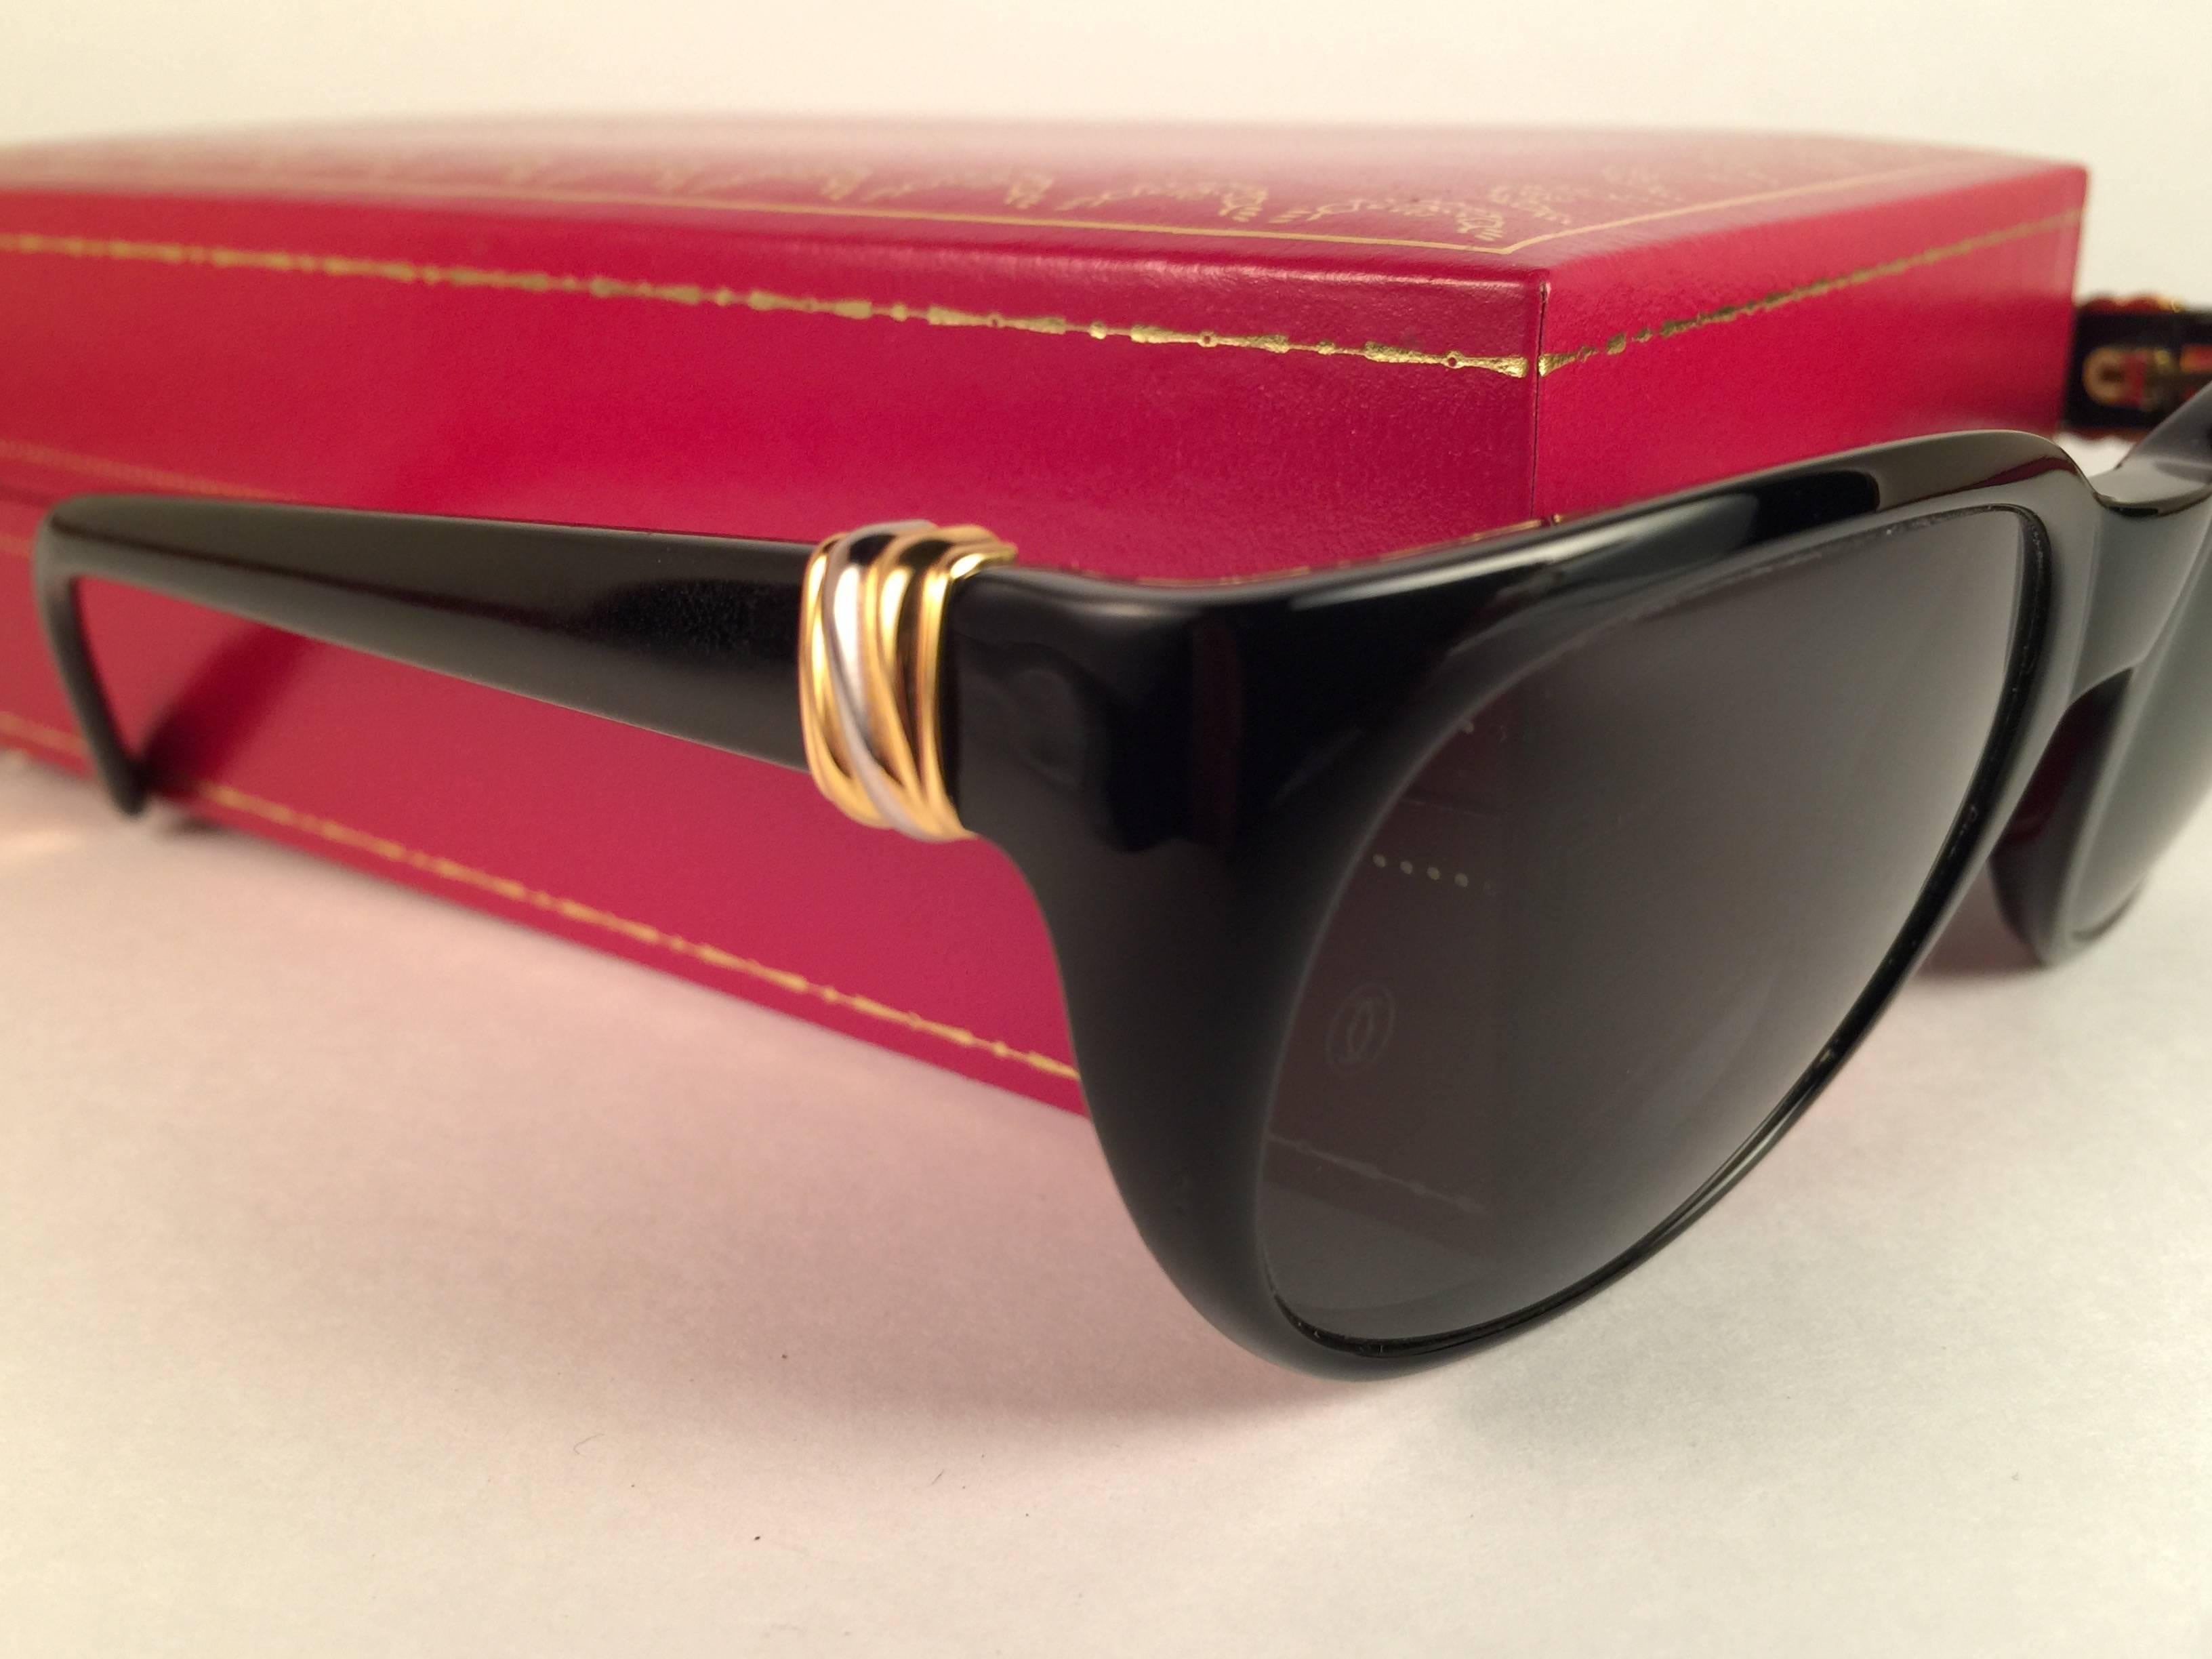 New Vintage Cartier Trinity Black 18k Gold Plated Accents France 1990 sunglasses 2